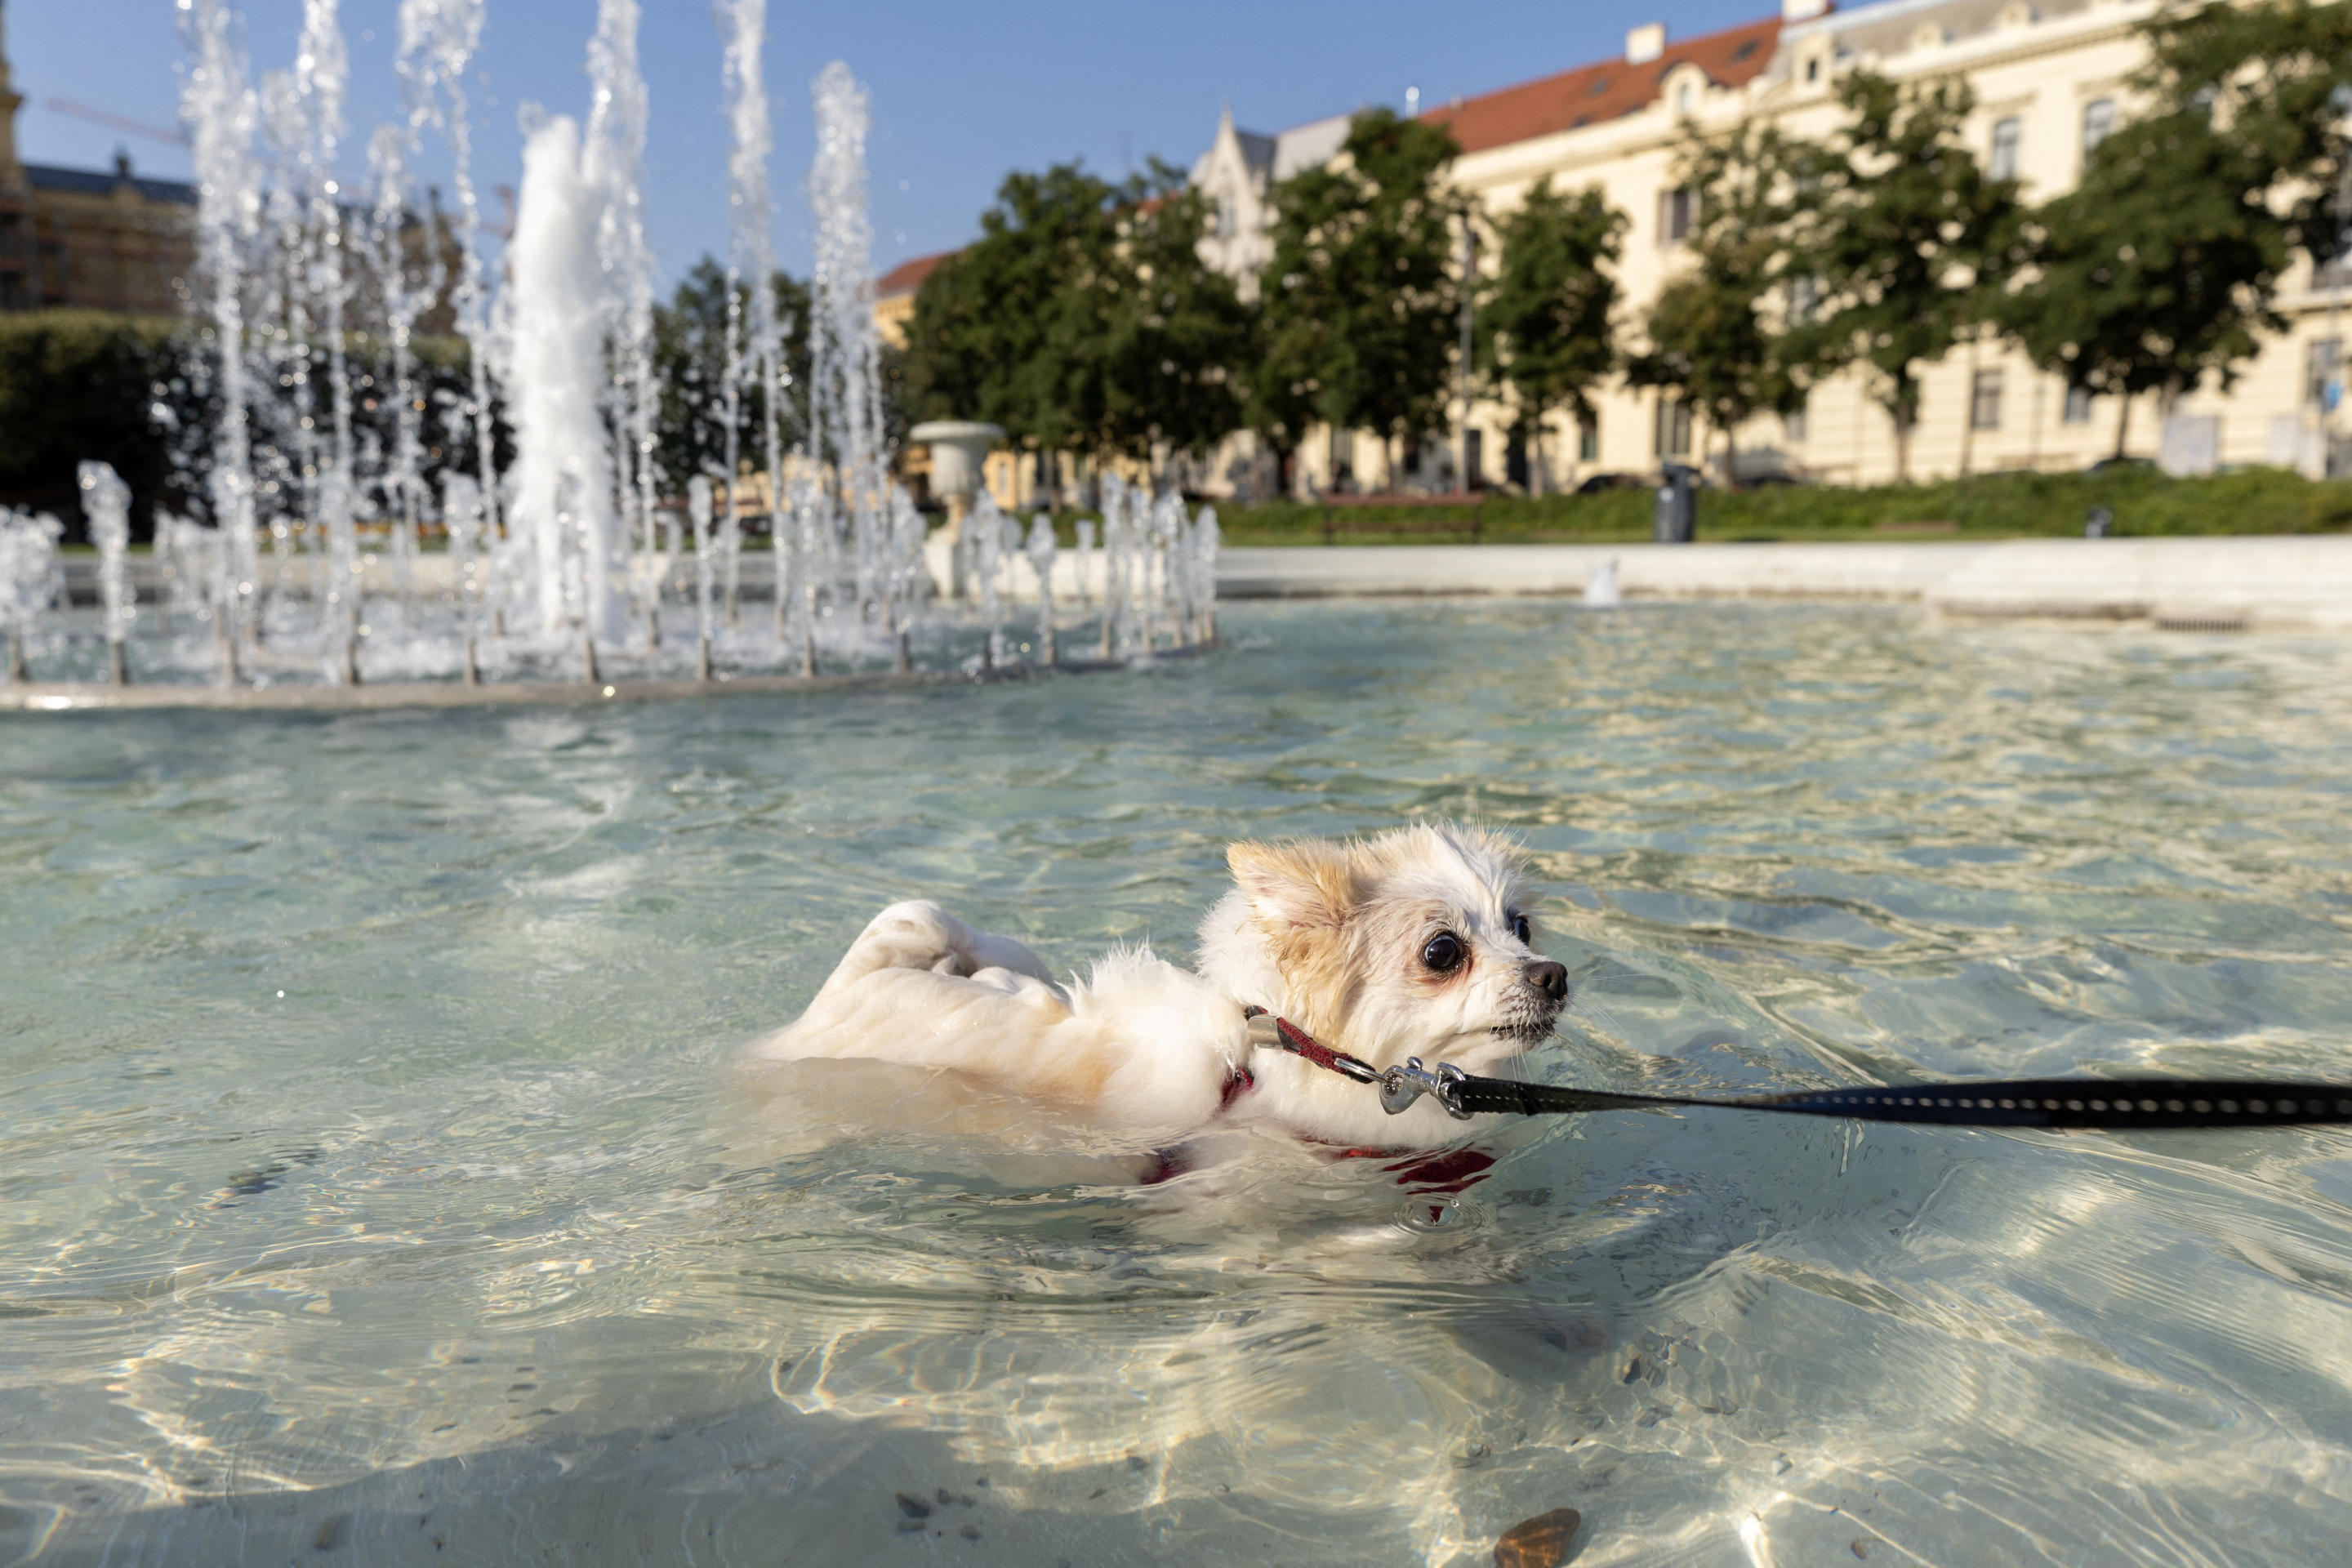 A small leashed dog swims in a public water fountain in Zagreb, Croatia.